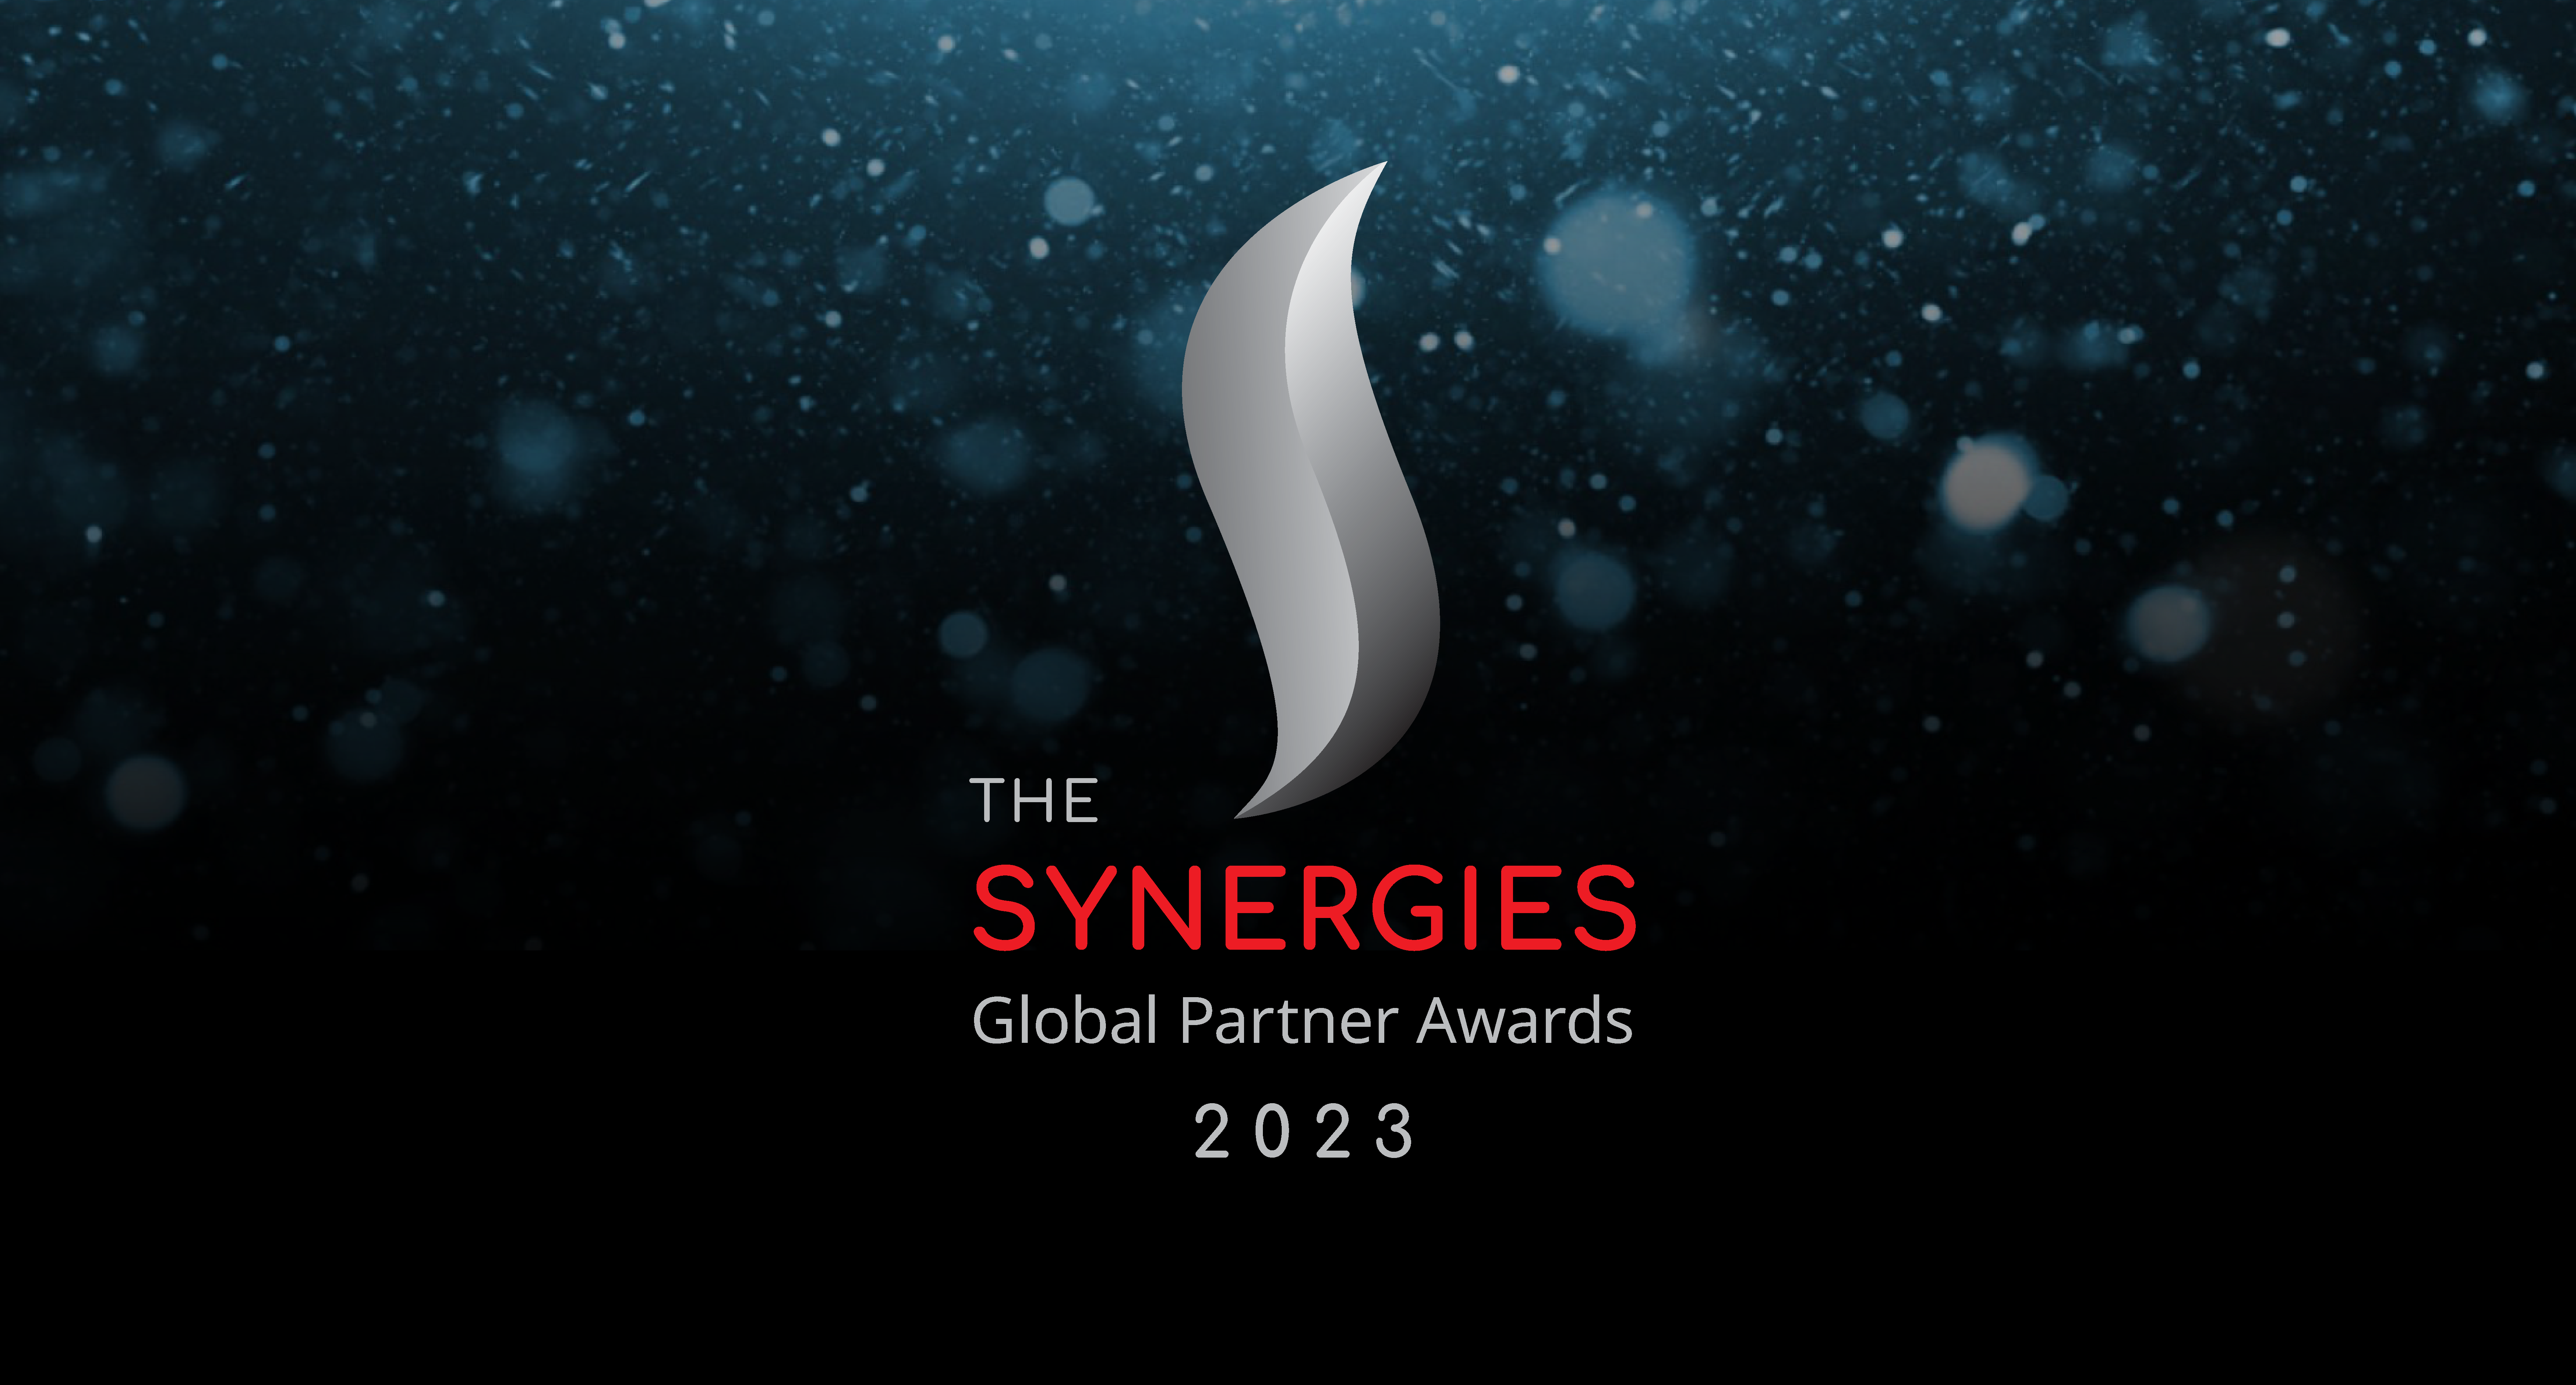 The Synergies Global Partner Awards 2023